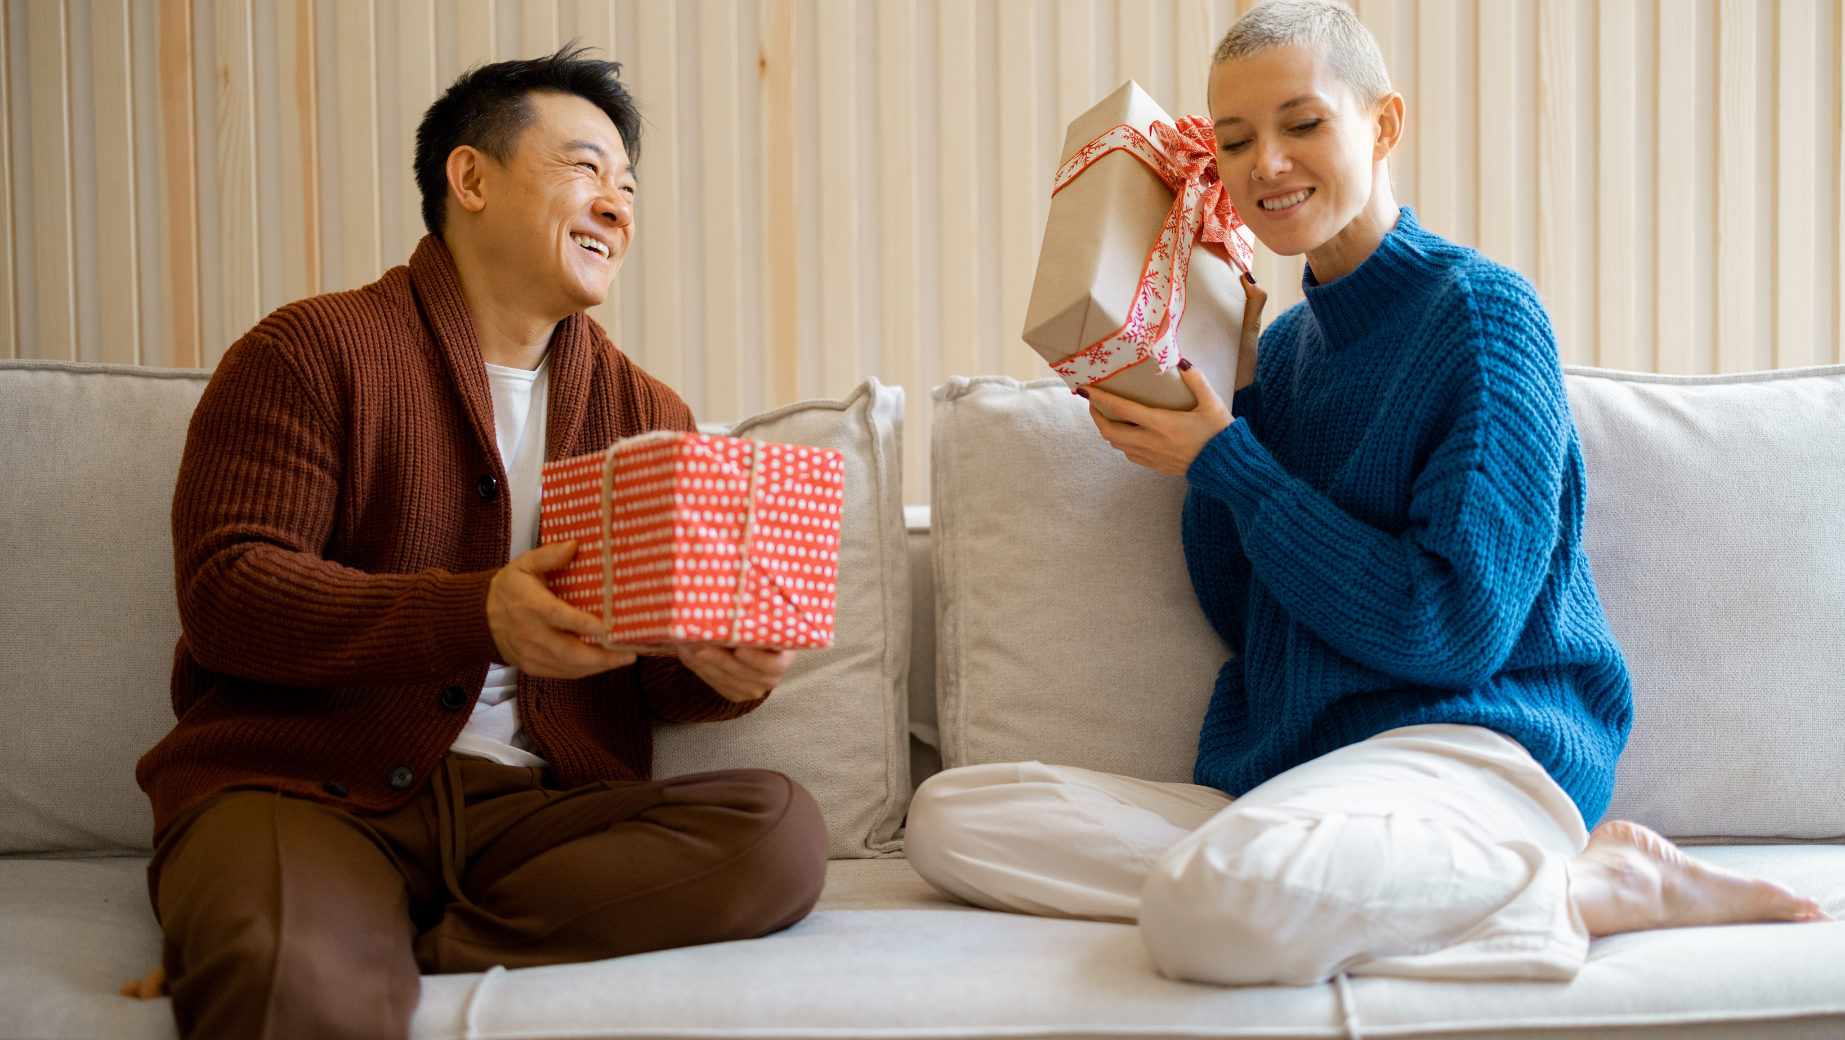 Asian American man and Caucasian woman sitting on a couch both holding in their hands wrapped holiday gifts